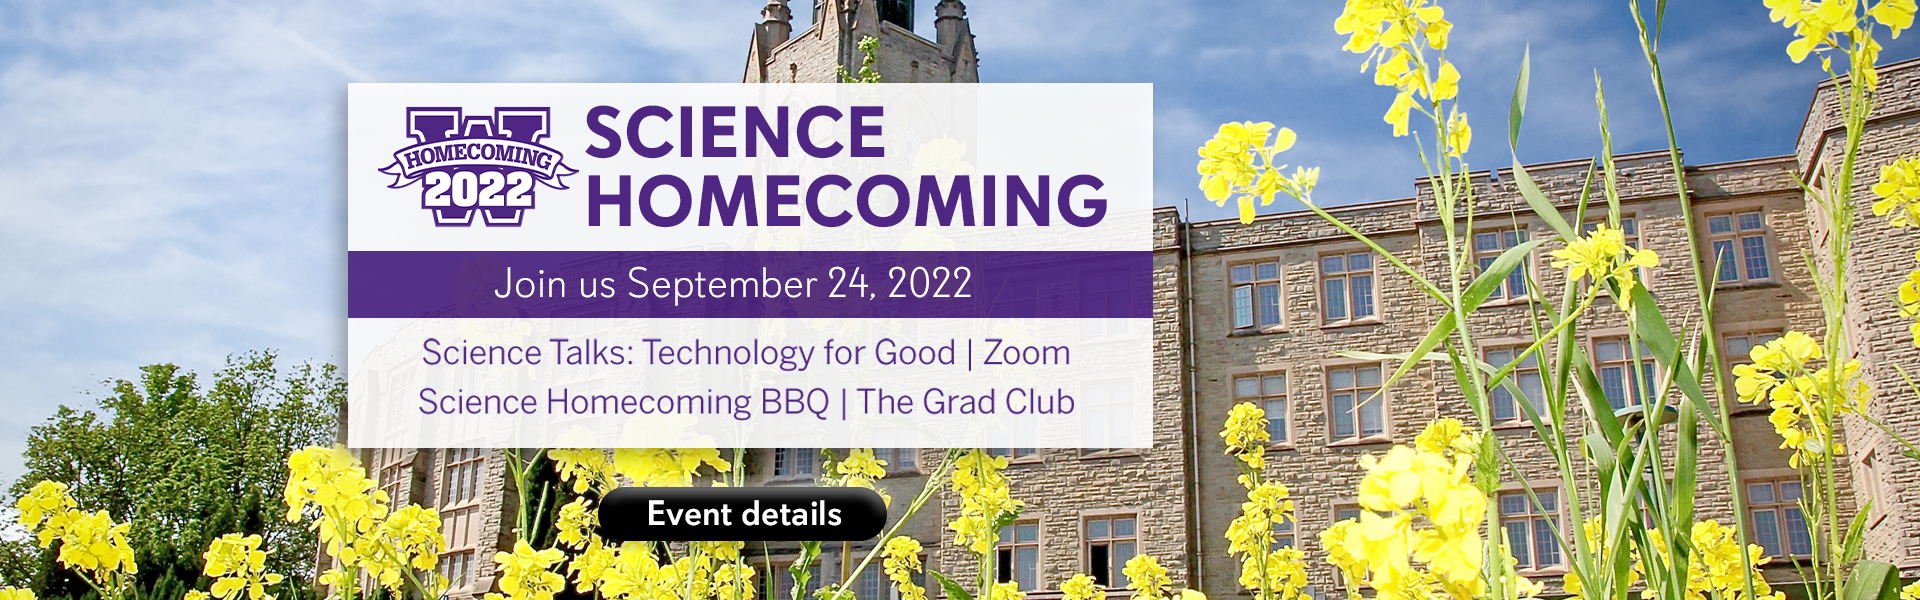 Science homecoming banner with building in the background